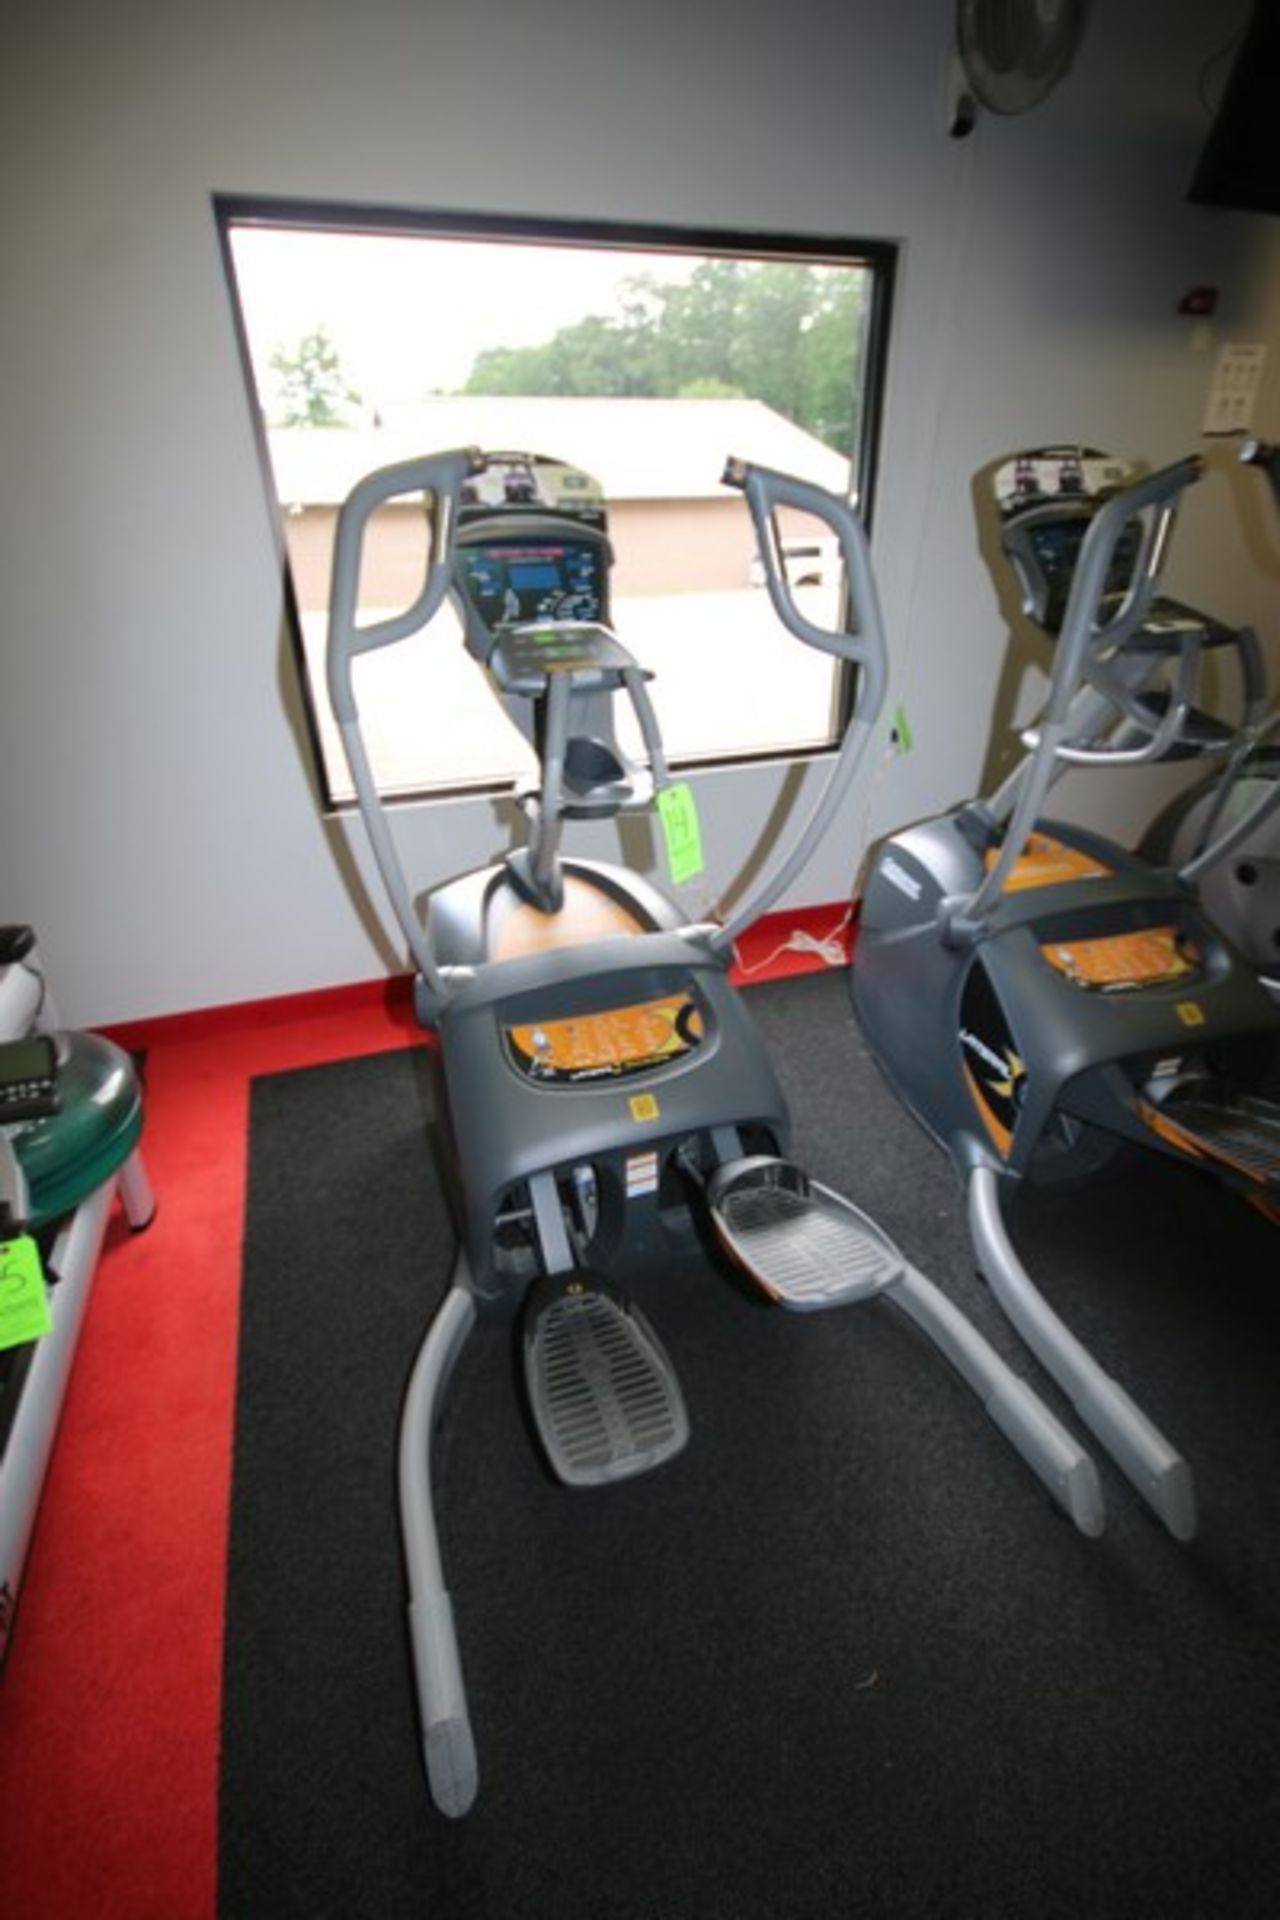 Octane Fitness Lateral X Stepper Machine, Overall Dims.: Aprox. 64" L x 43" W x 64" H (LOCATED @